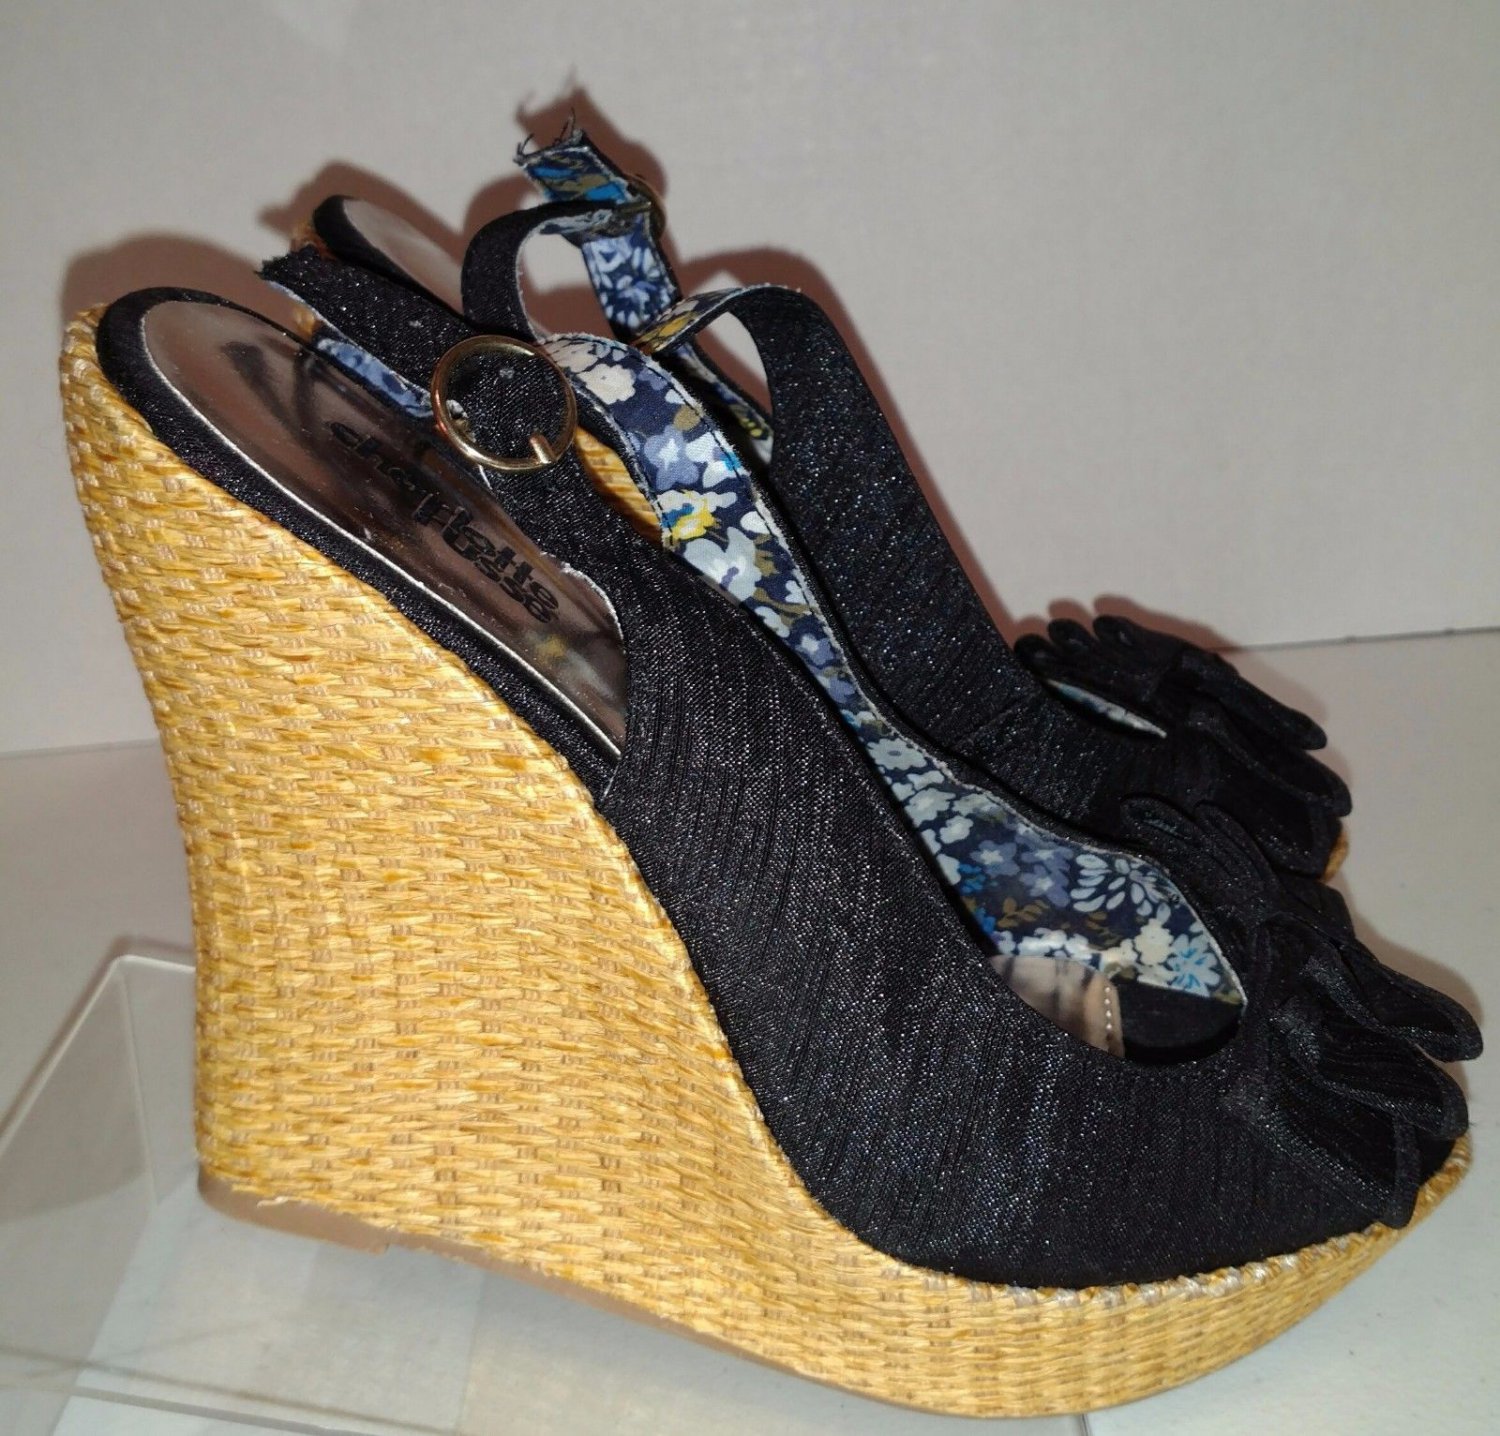 Charlotte Russe Ladies Black Fabric With Bows Woven Wedge Heel Shoes Size 7